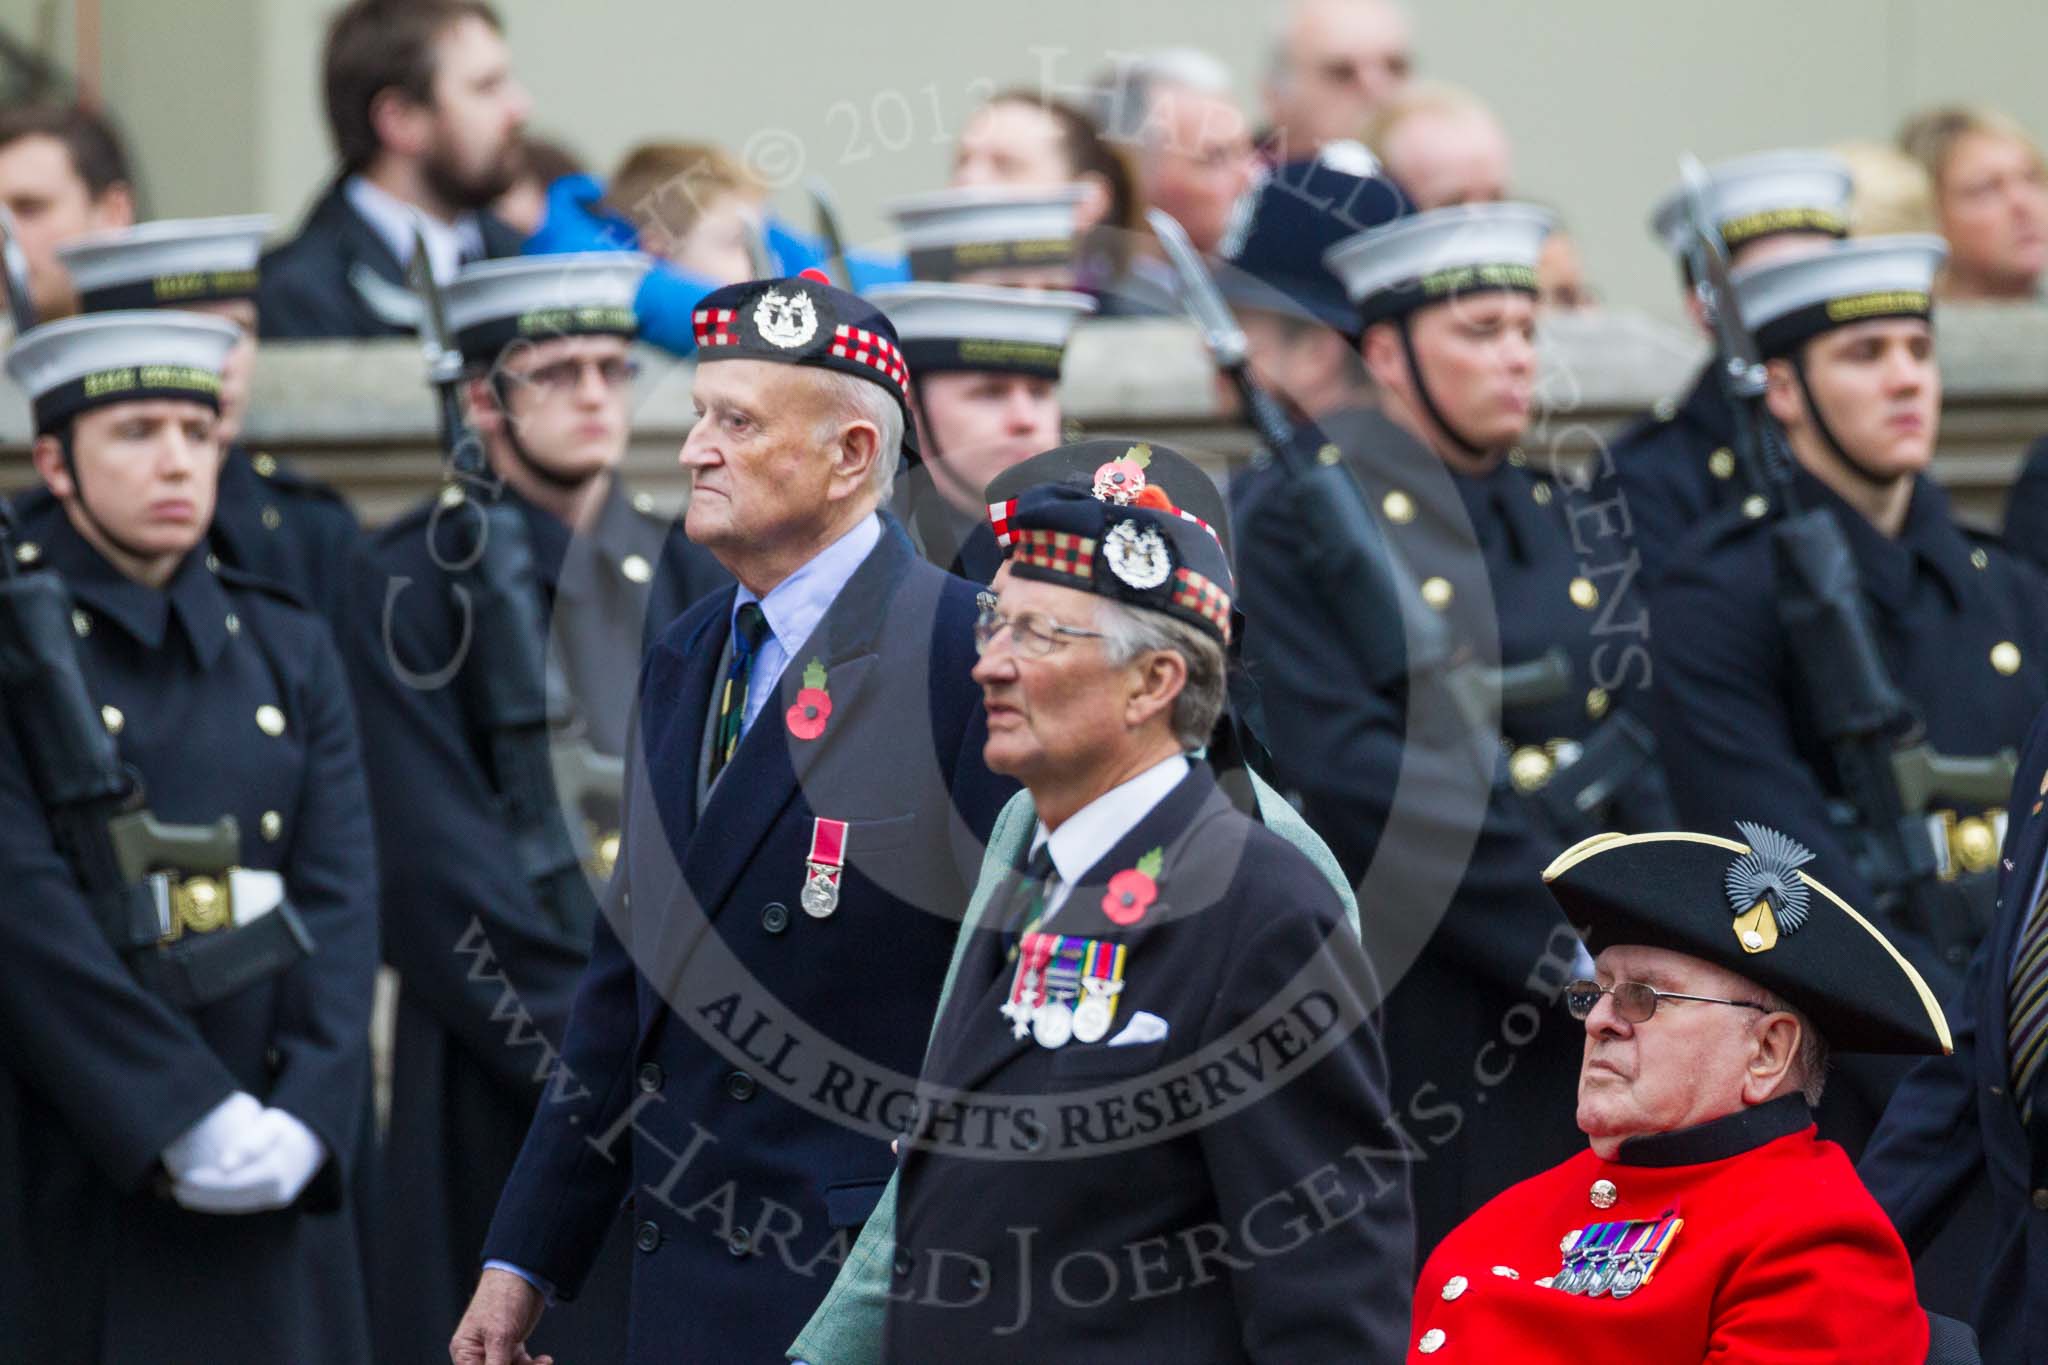 Remembrance Sunday at the Cenotaph 2015: Group A6, Gordon Highlanders Association.
Cenotaph, Whitehall, London SW1,
London,
Greater London,
United Kingdom,
on 08 November 2015 at 12:10, image #1219